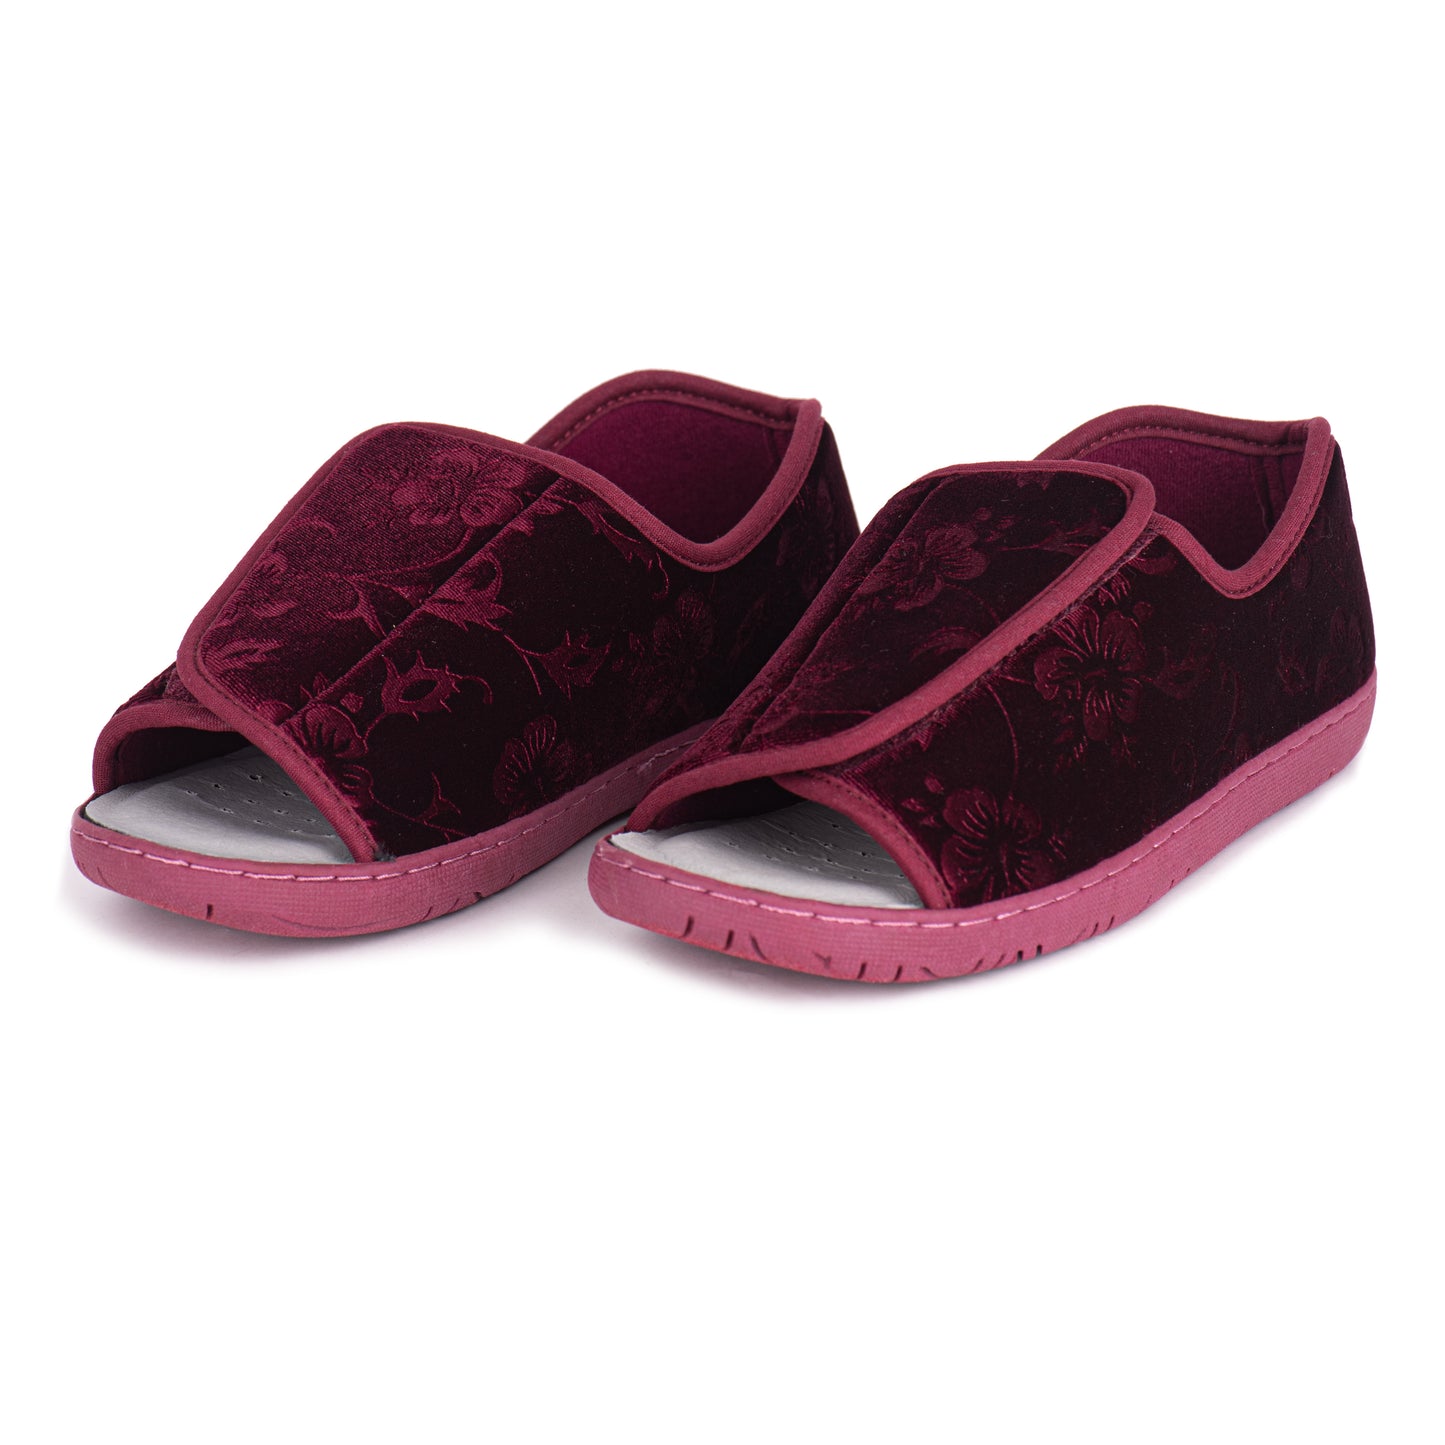 Slippers - Women's Foamtread Extra Depth (New Product!)